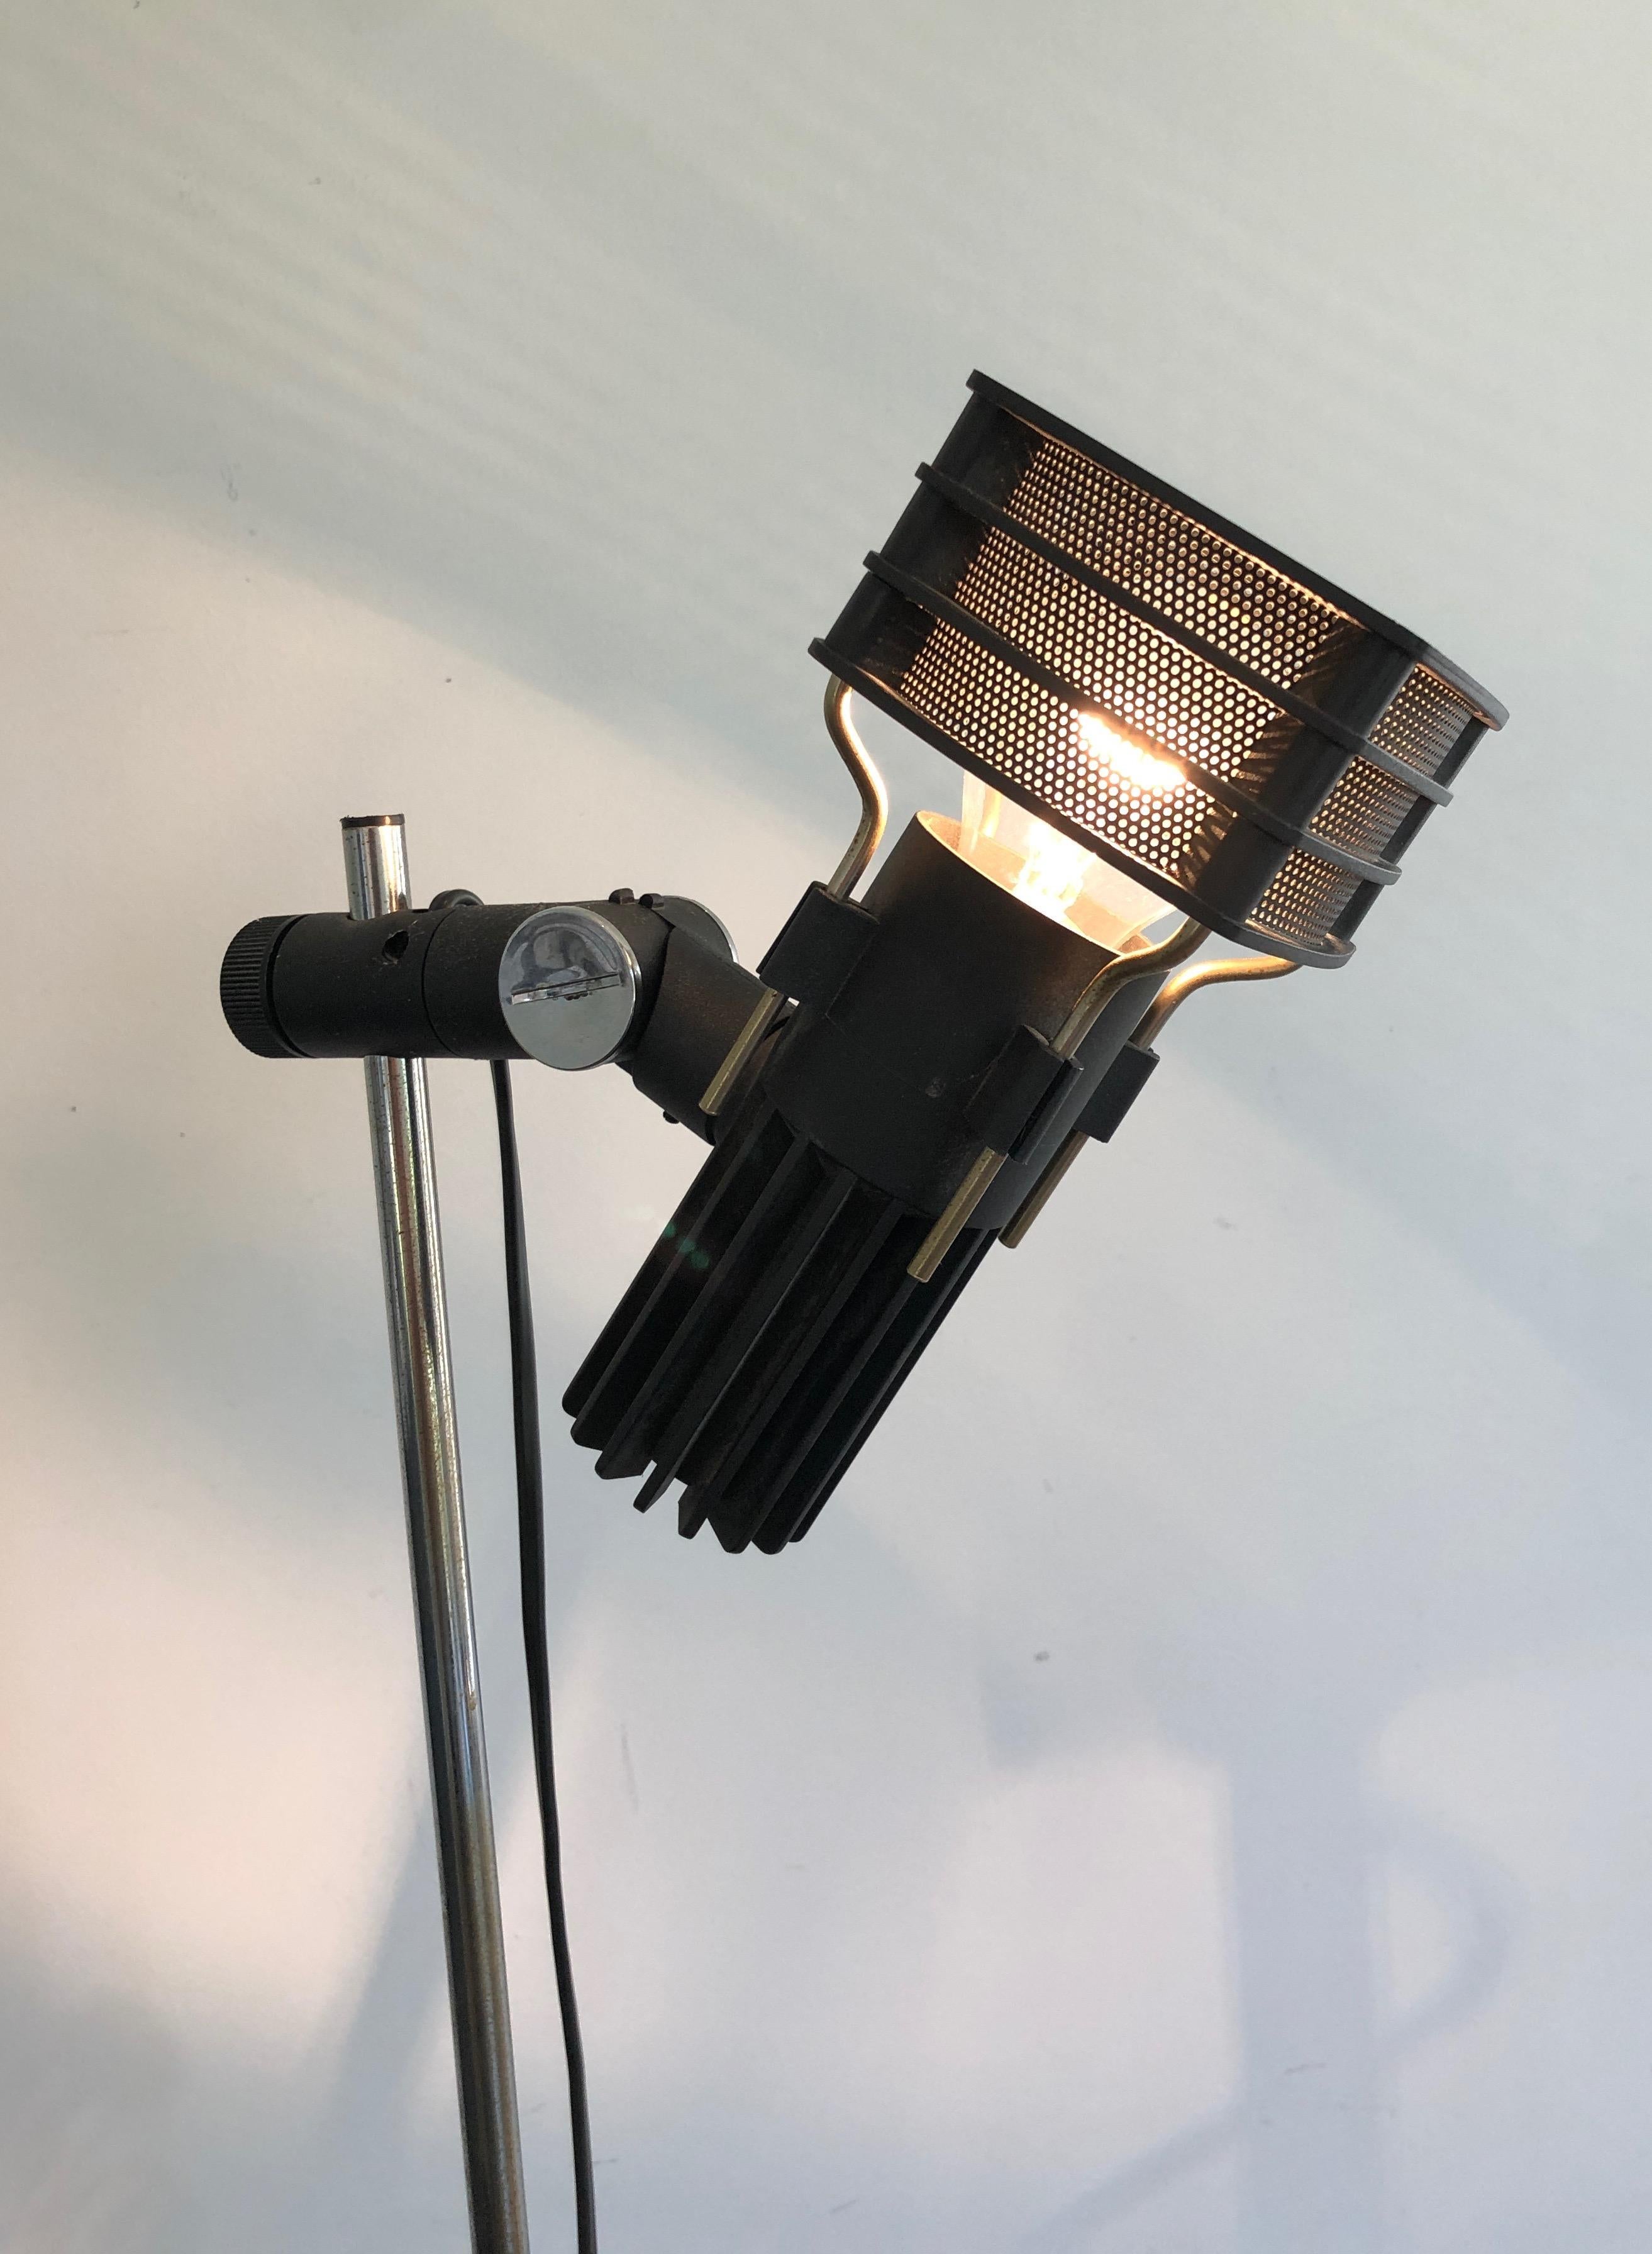 Late 20th Century Chrome and Black Lacquered Design Floor Lamp with Adjustable Lights, French Work For Sale